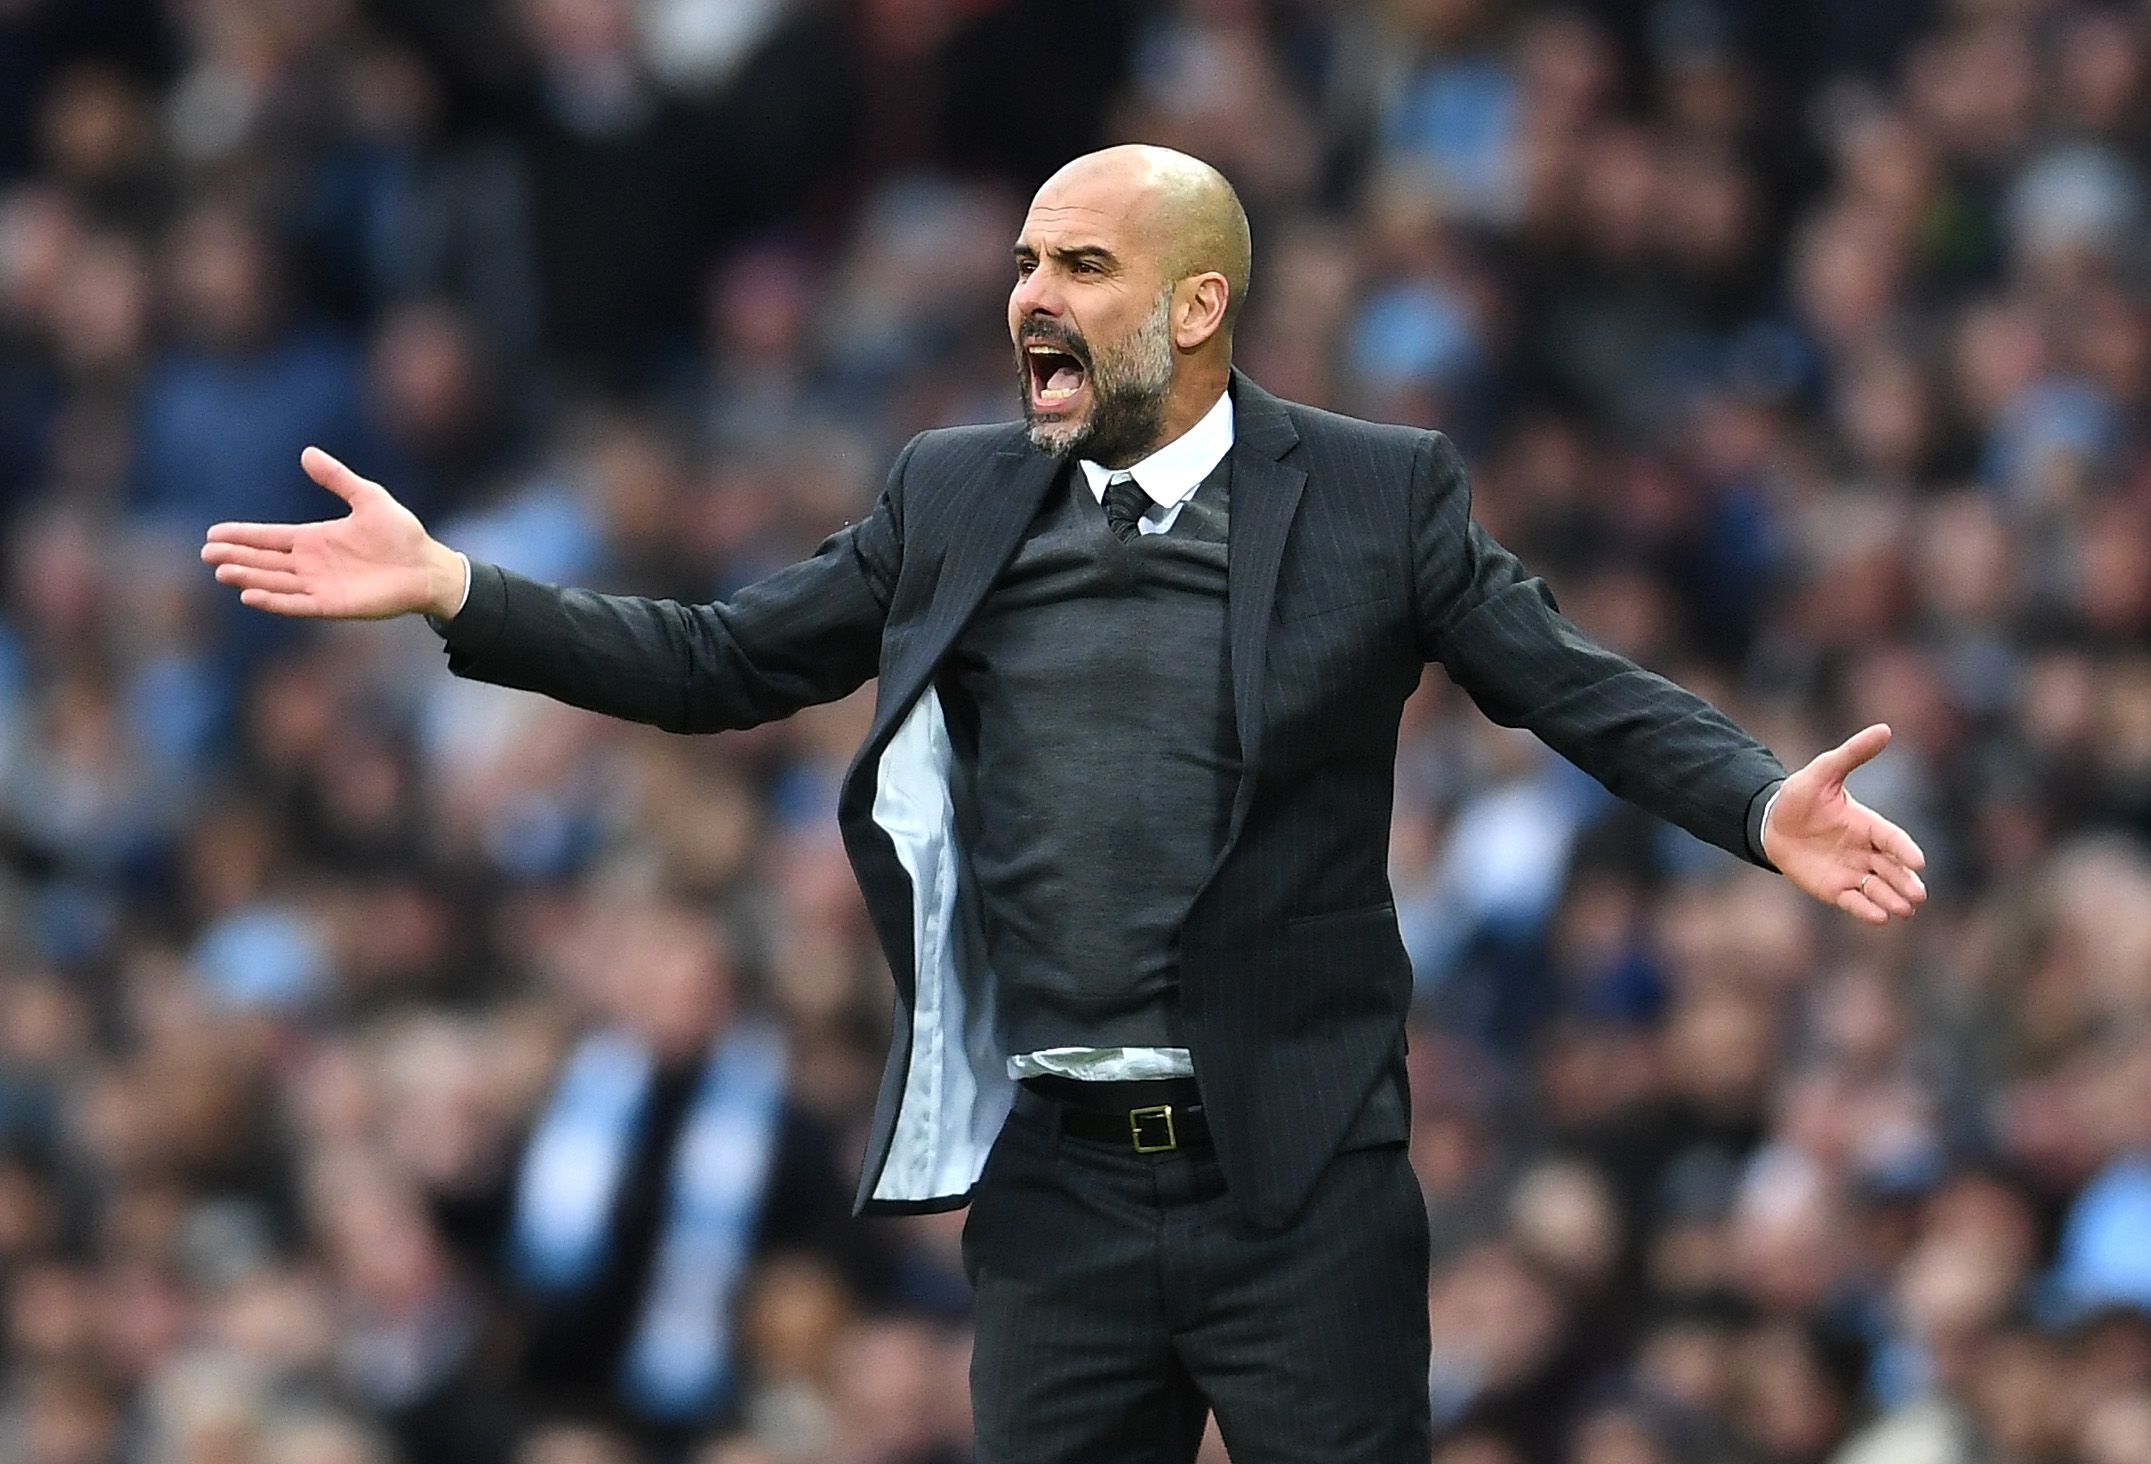 Exclusive: Why Pep Guardiola Wanted a Struggle at Manchester City